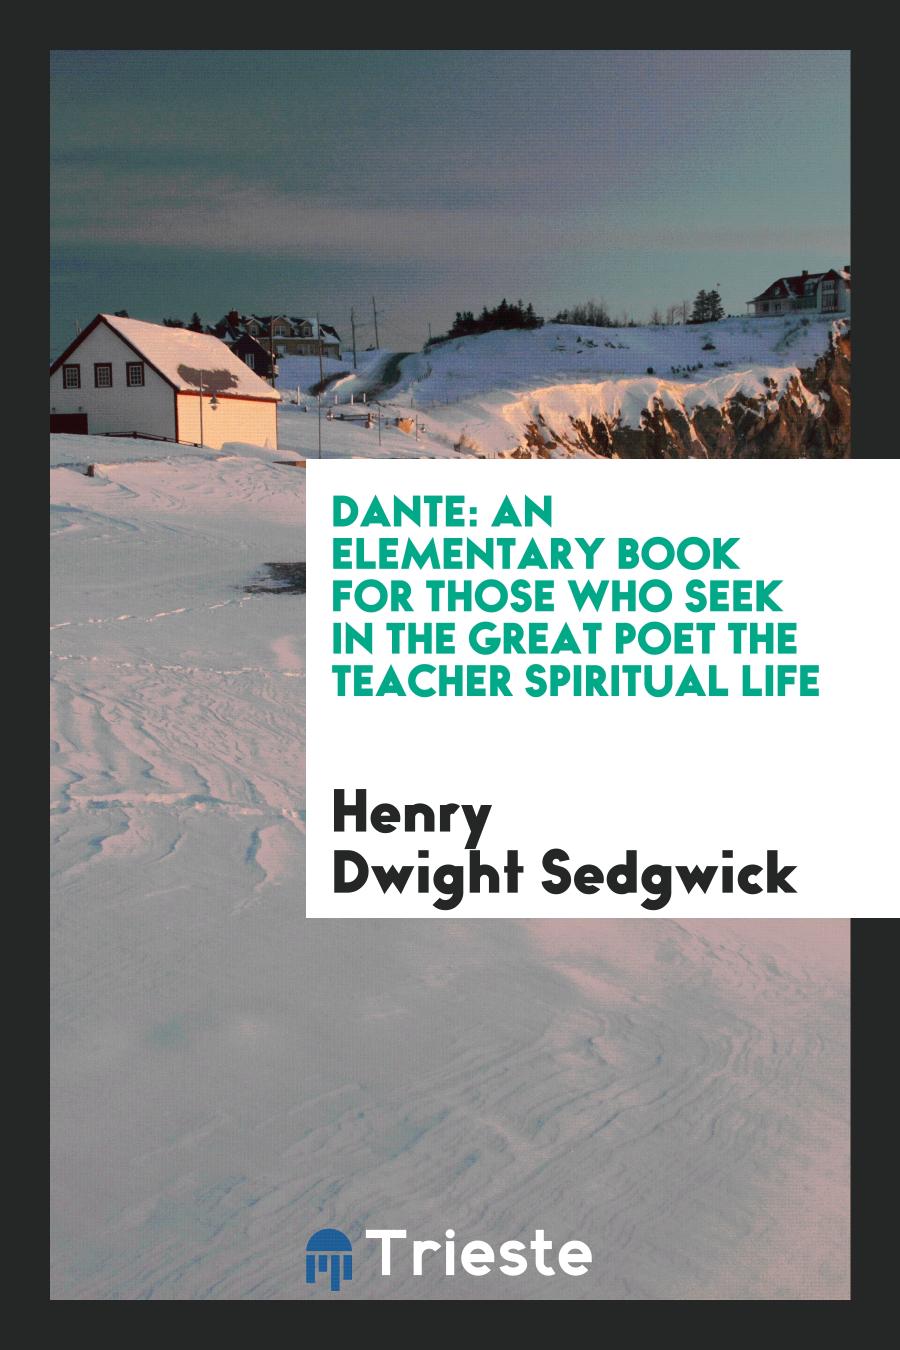 Dante: An Elementary Book for Those who Seek in the Great Poet the Teacher Spiritual Life